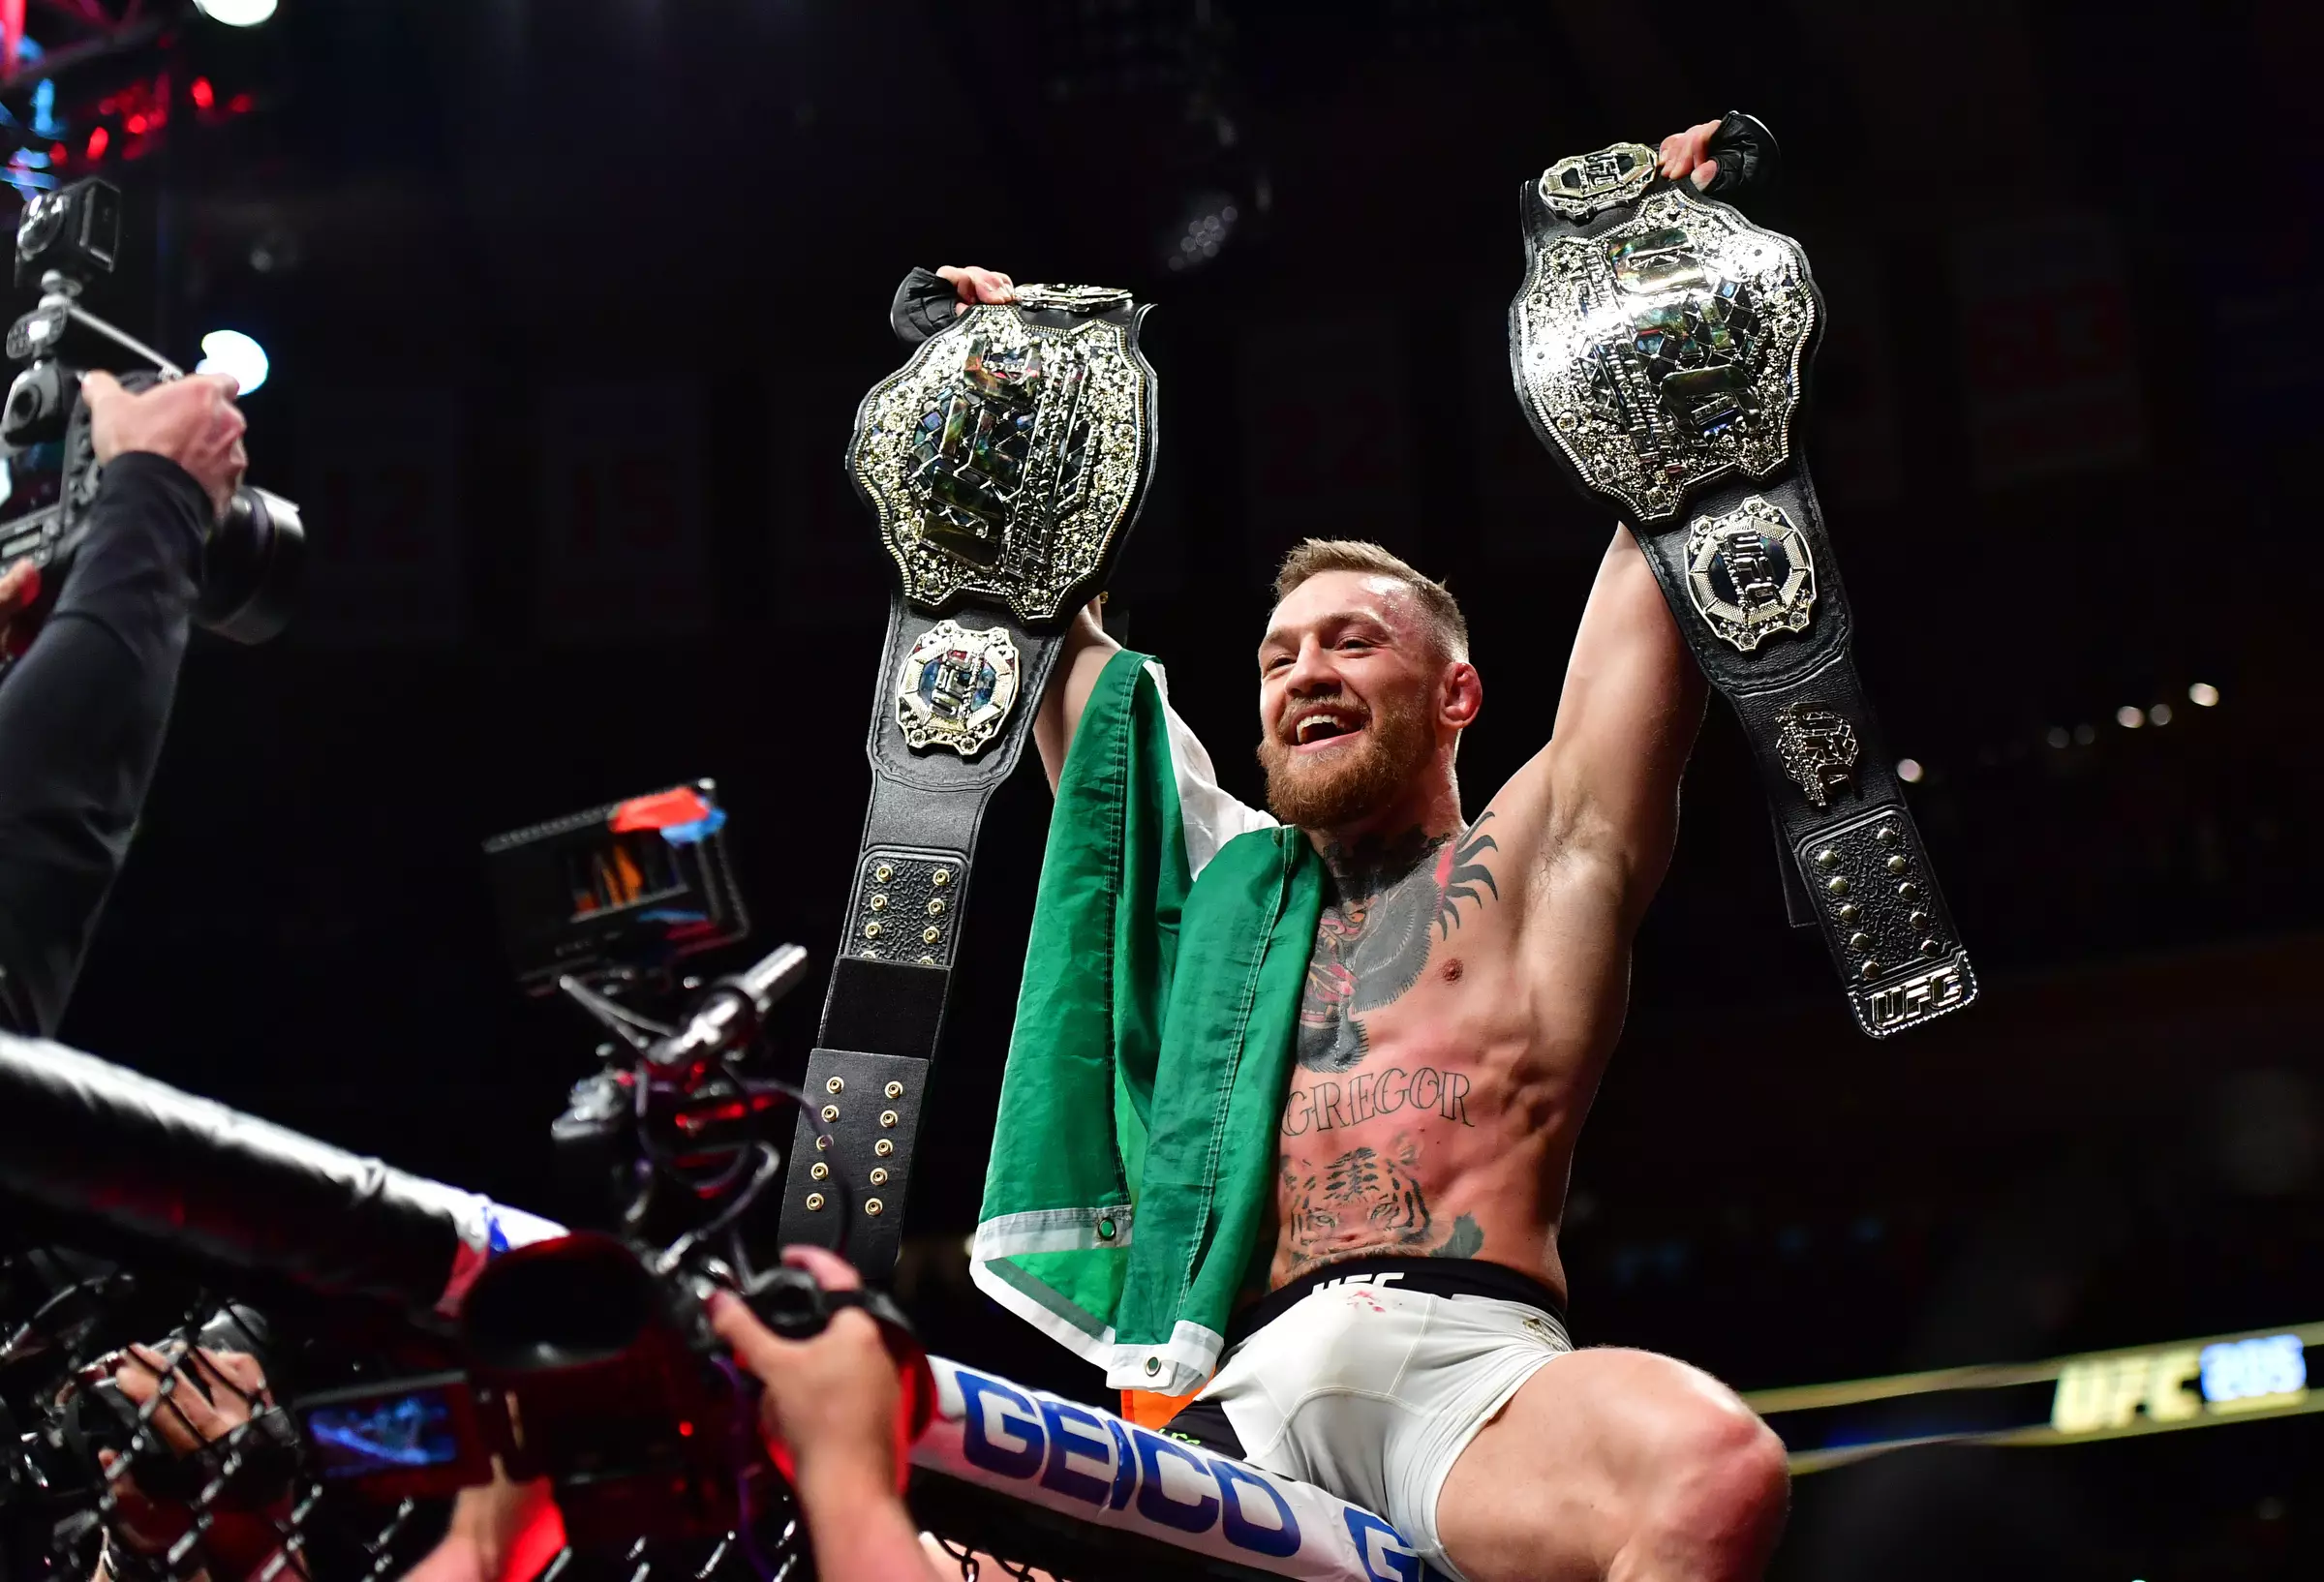 McGregor holds up his two UFC titles following victory at UFC 205. Image: PA